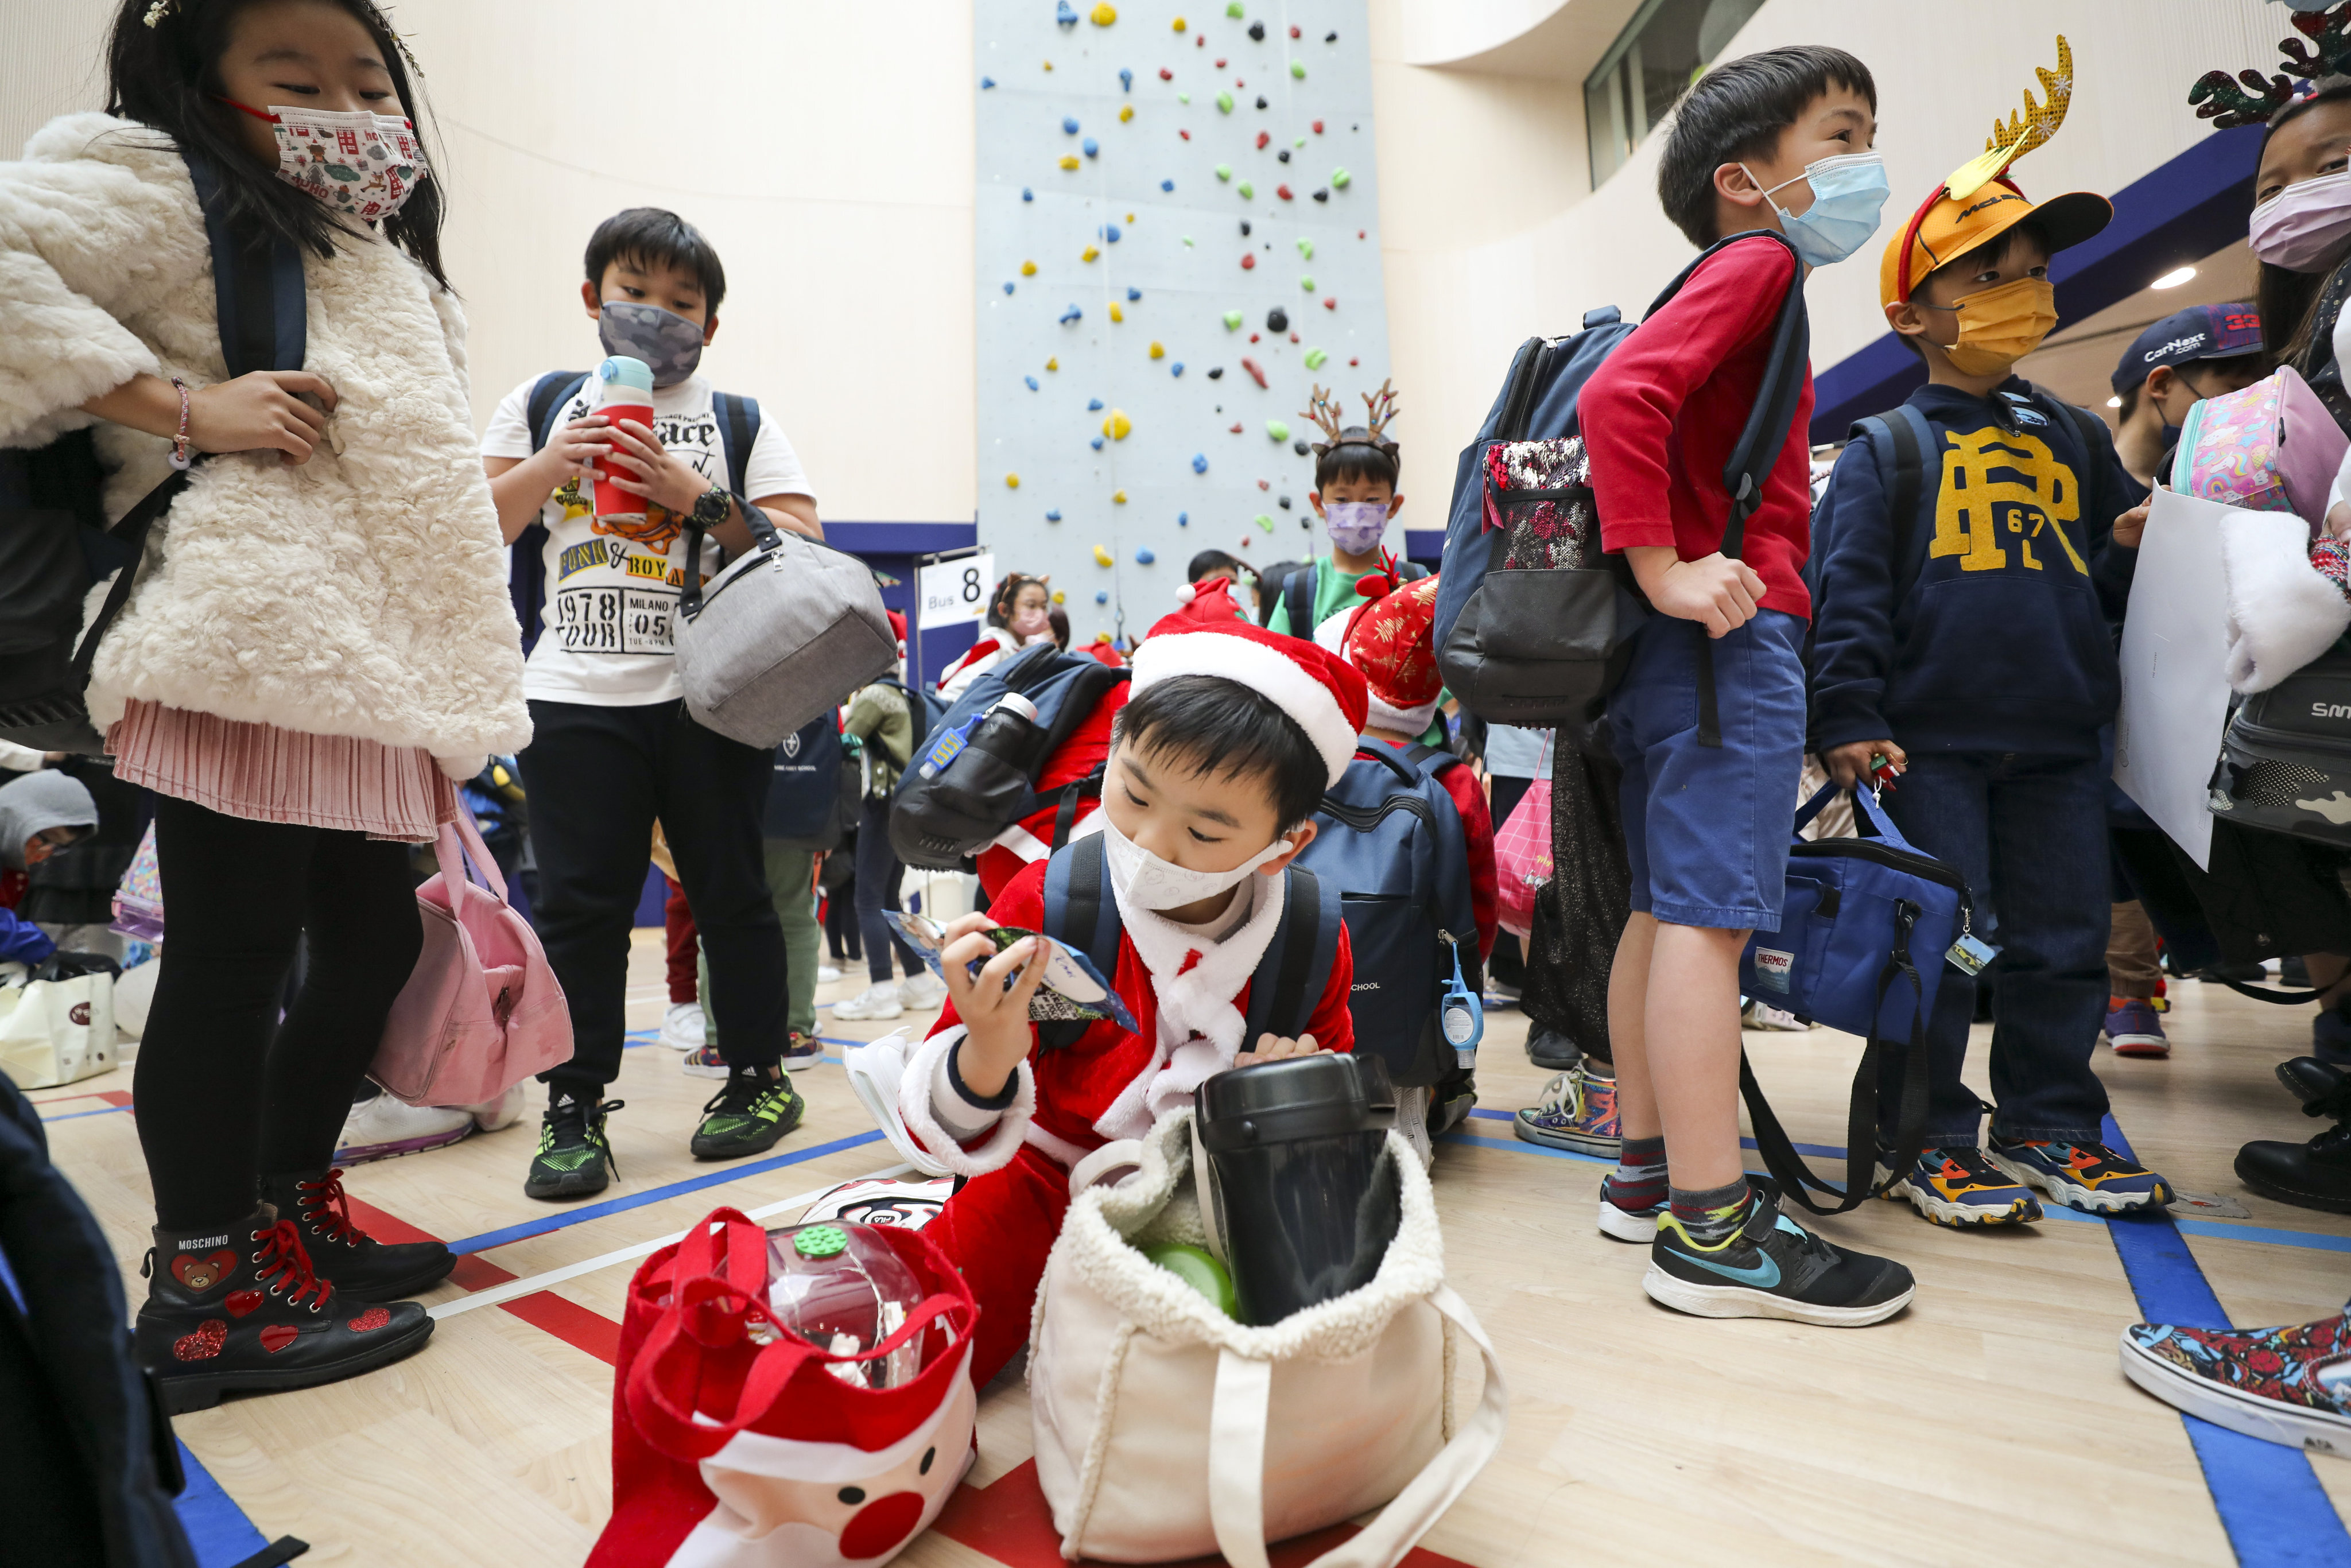 Wycombe Abbey School students dress up in Christmas outfits to raise money for Operation Santa Claus. Photo: Xiaomei Chen